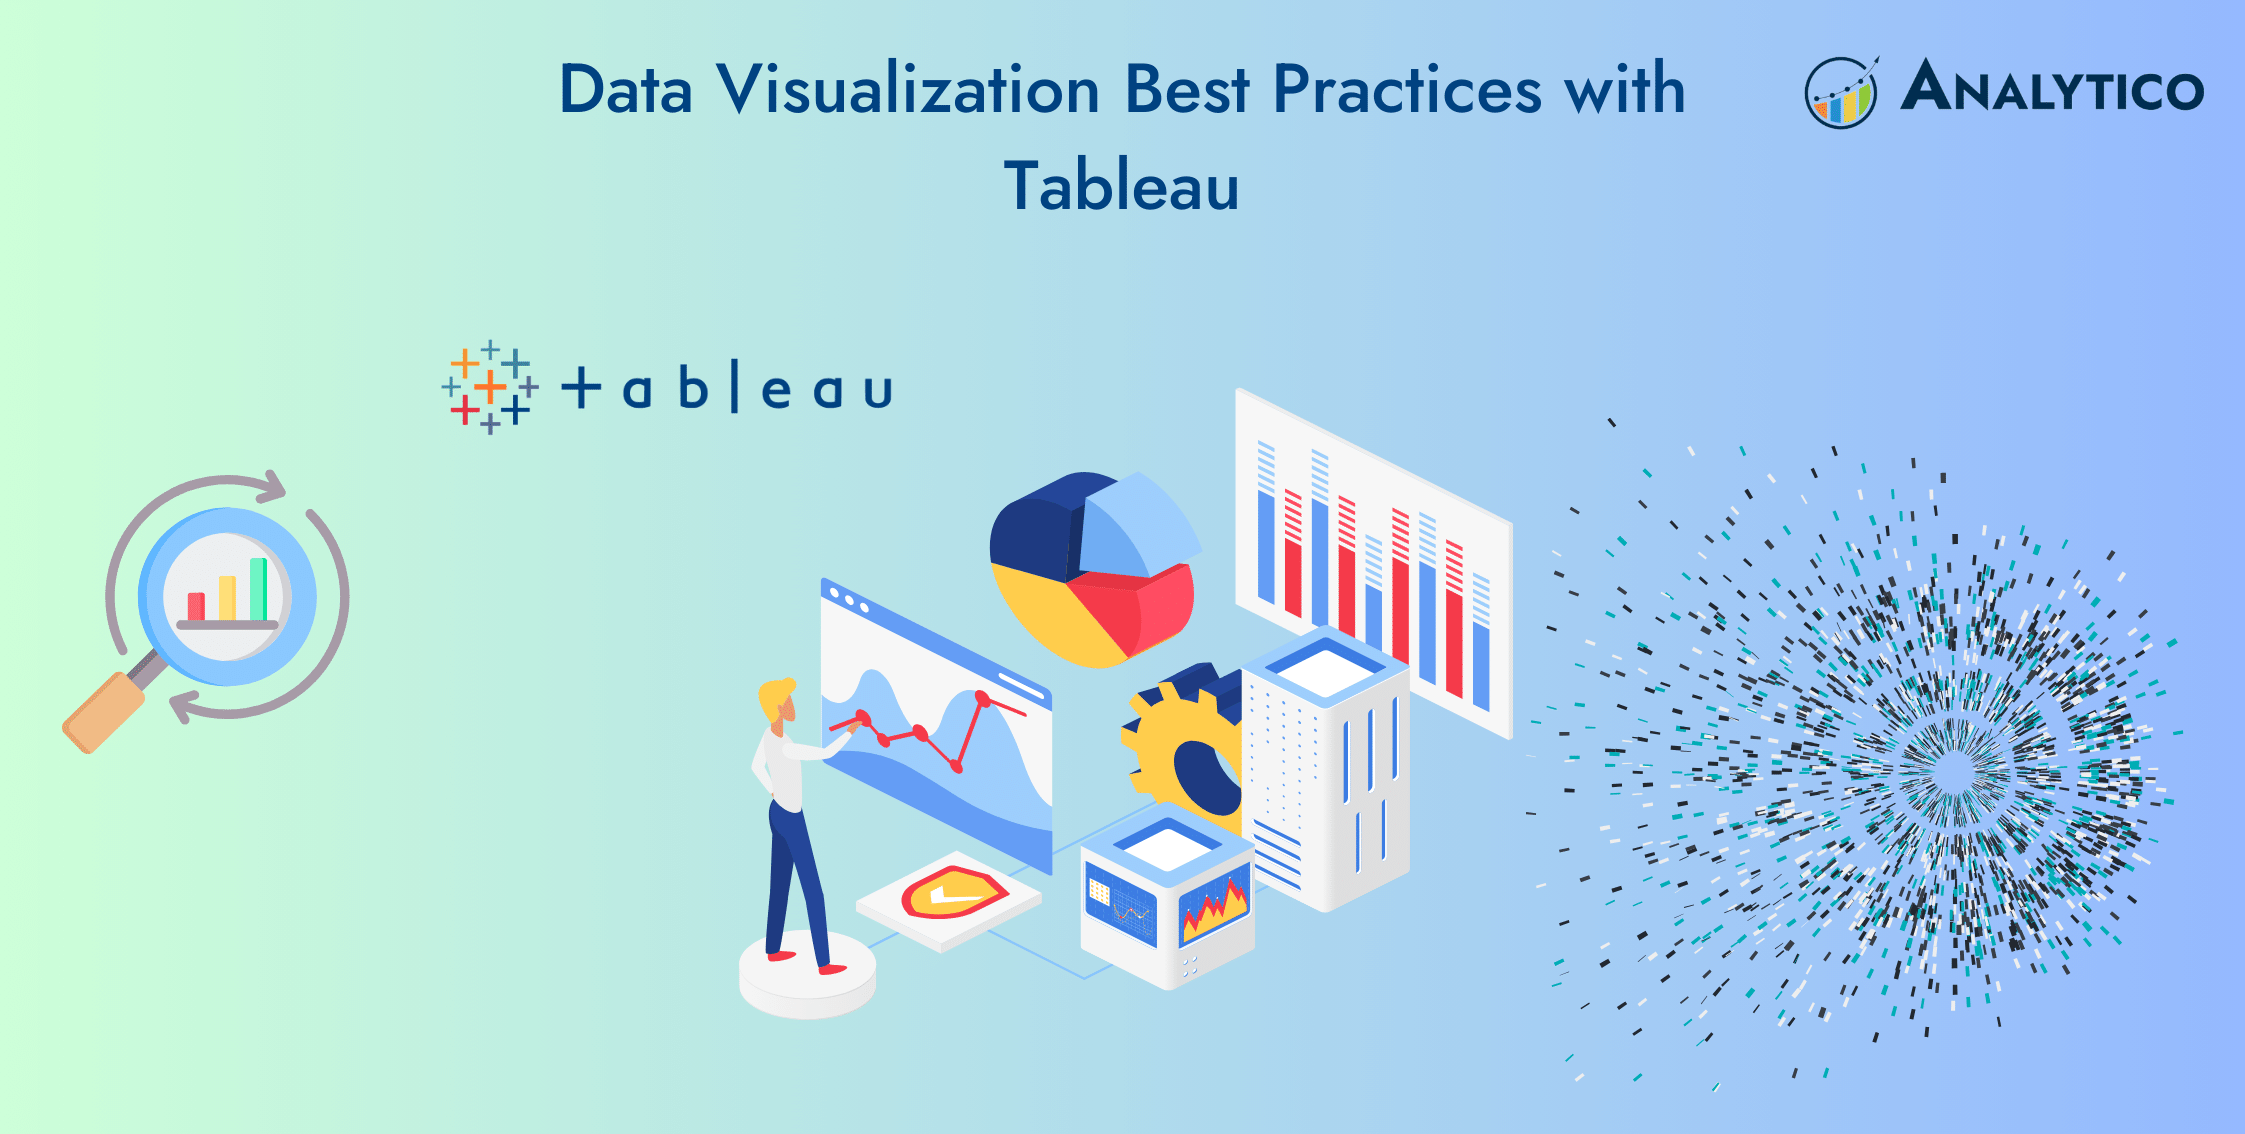 Data Visualization Best Practices with Tableau